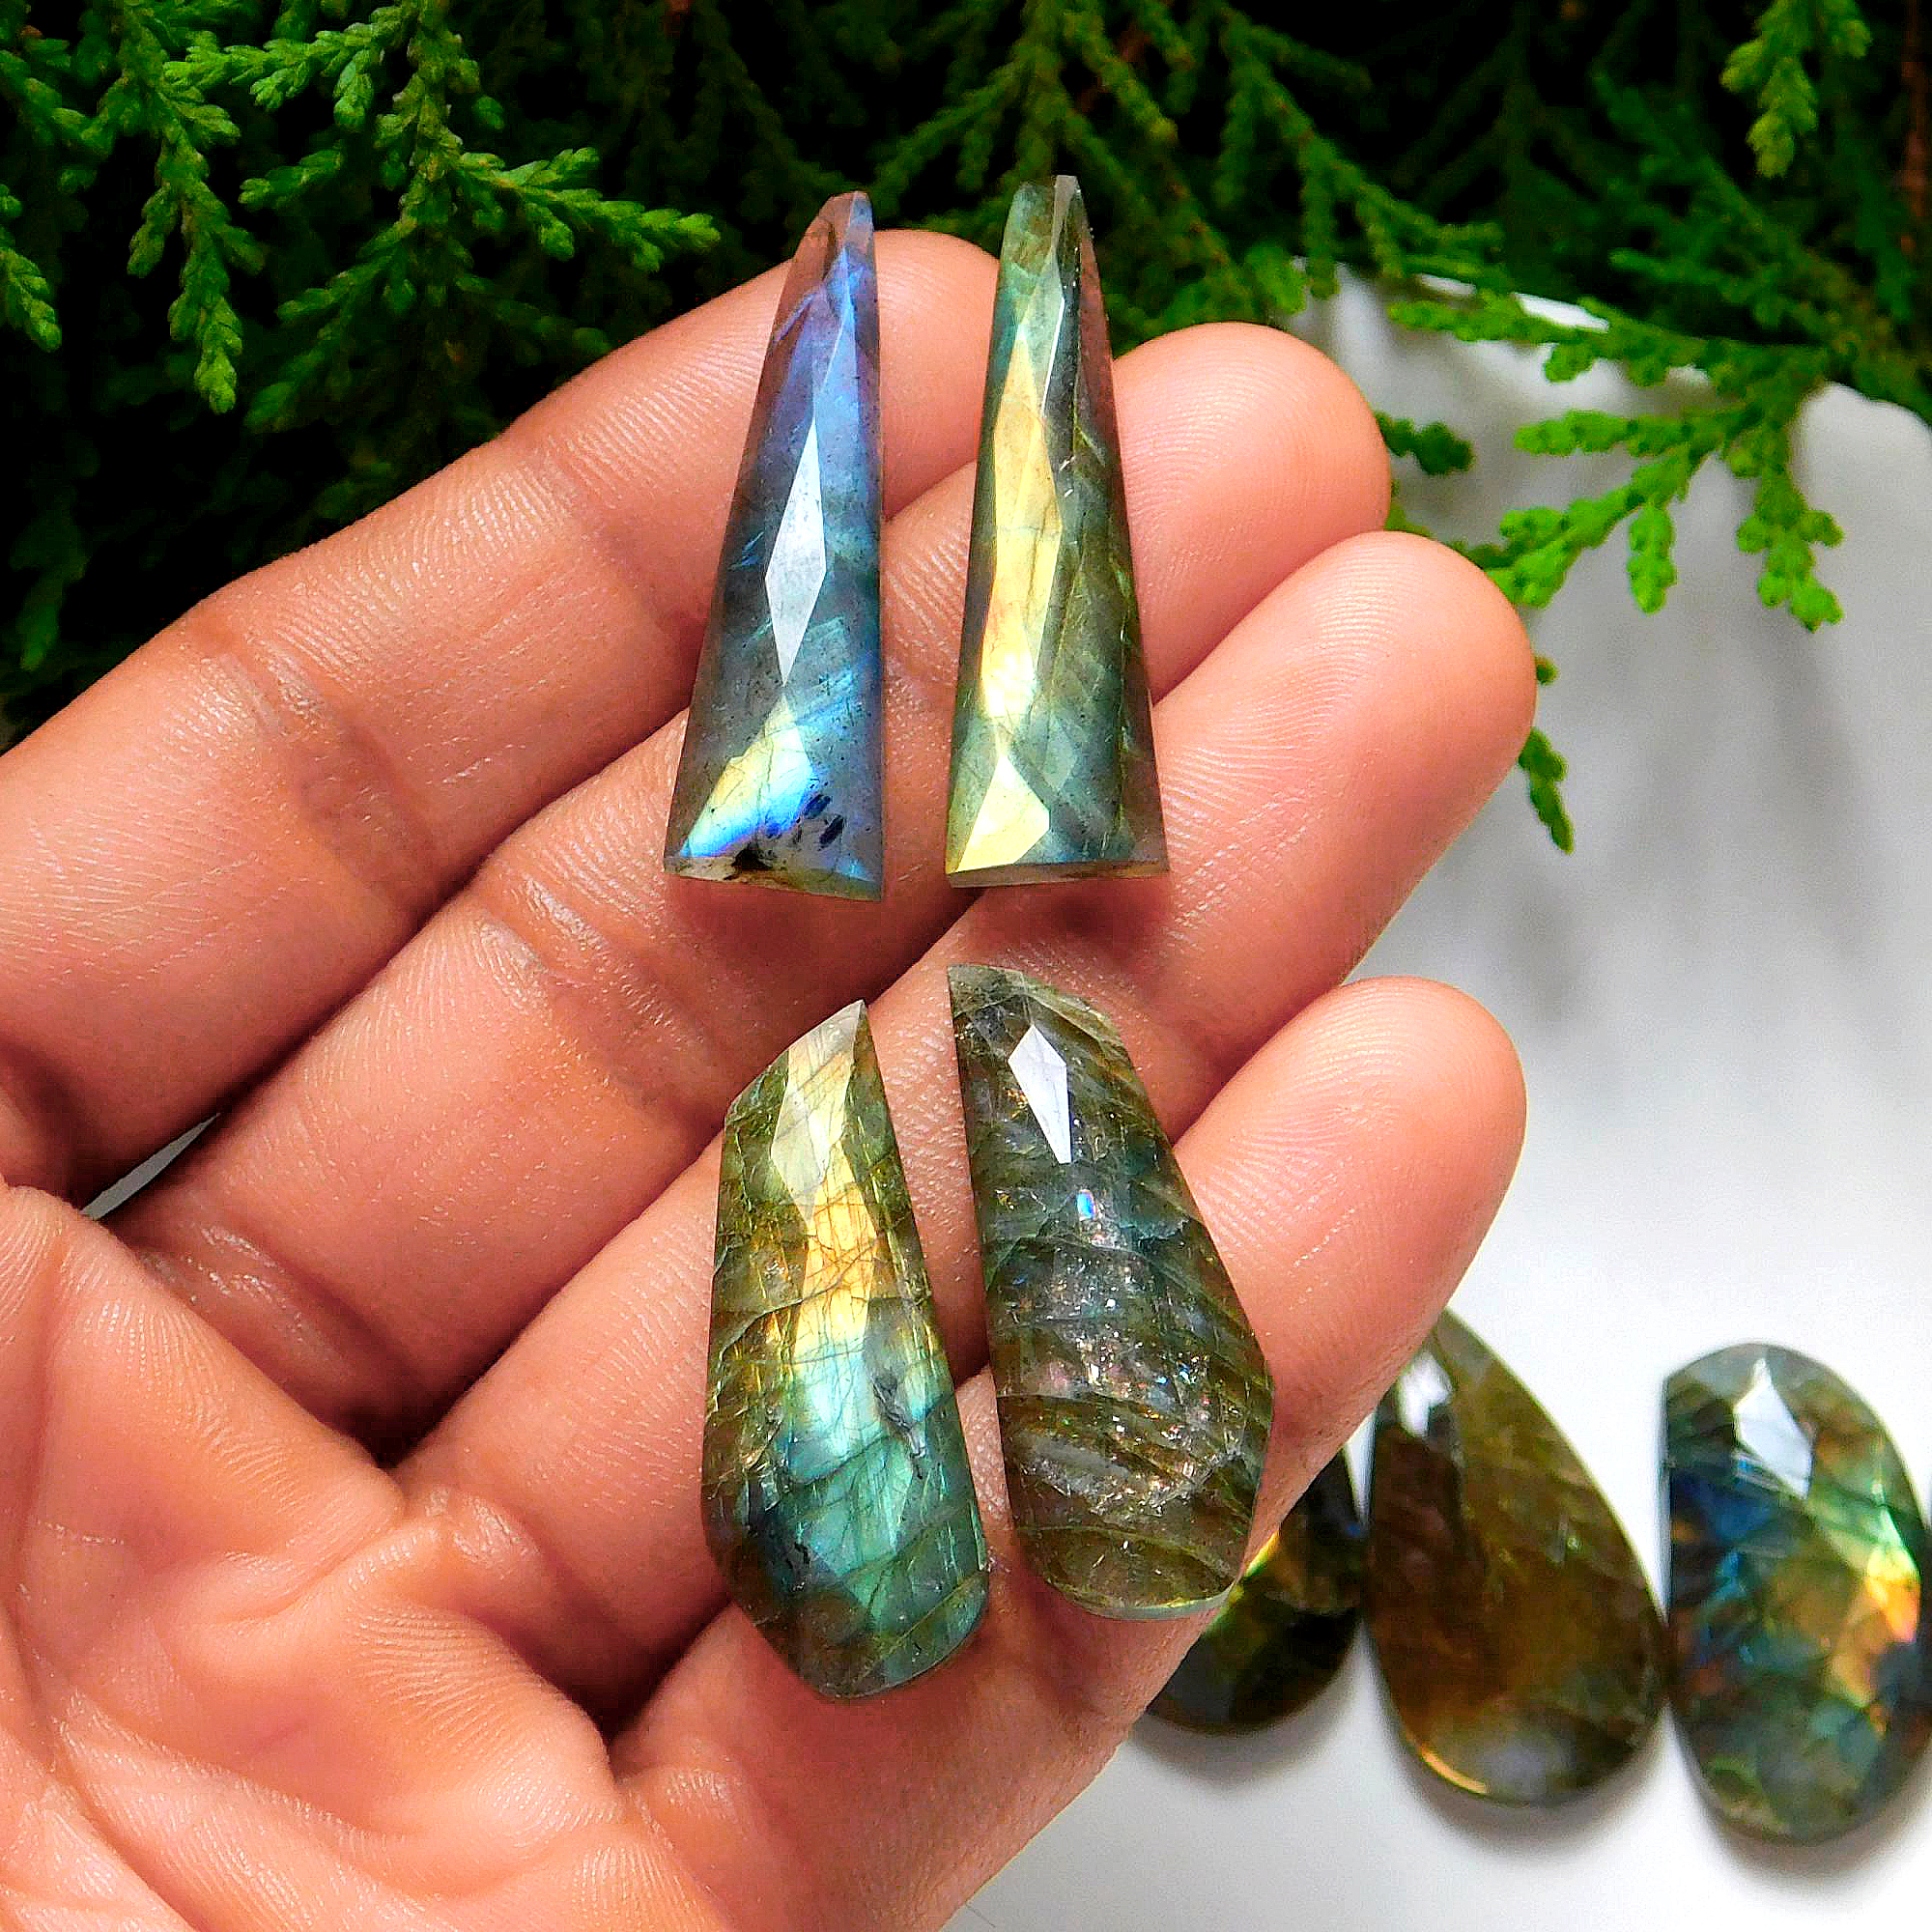 5 Pair 144 Cts Natural Faceted Labradorite Mix pair Cabochons Loose Gemstone Wholesale Lot Size 32x10 23x15mm